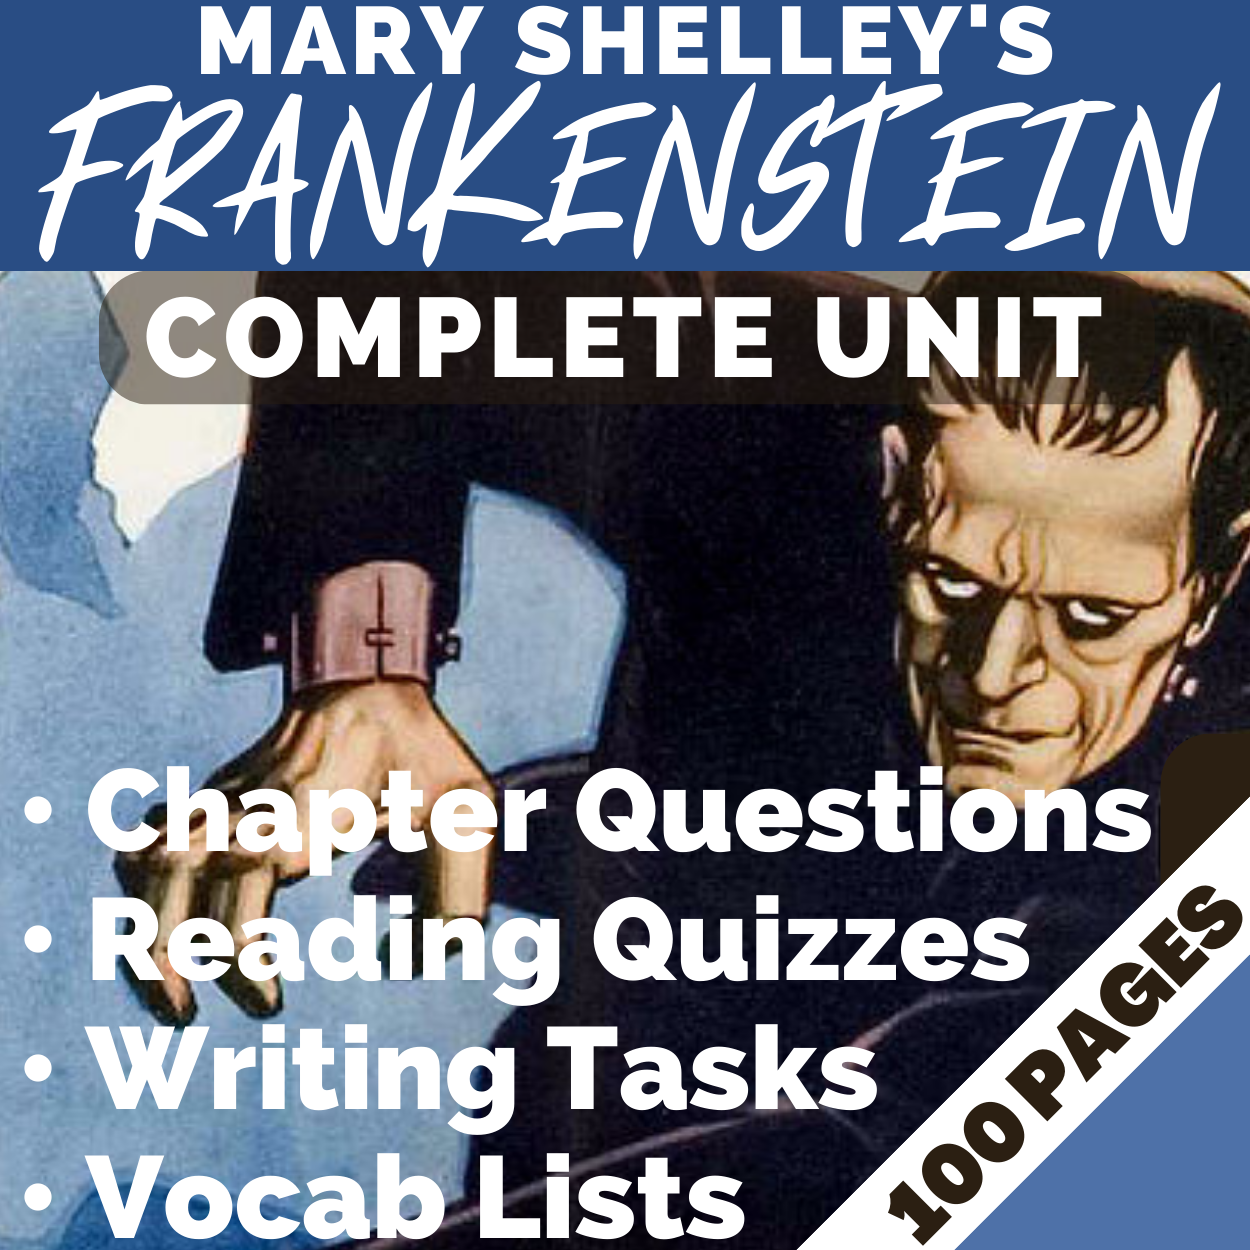 Frankenstein by Mary Shelley | Complete Teaching Unit